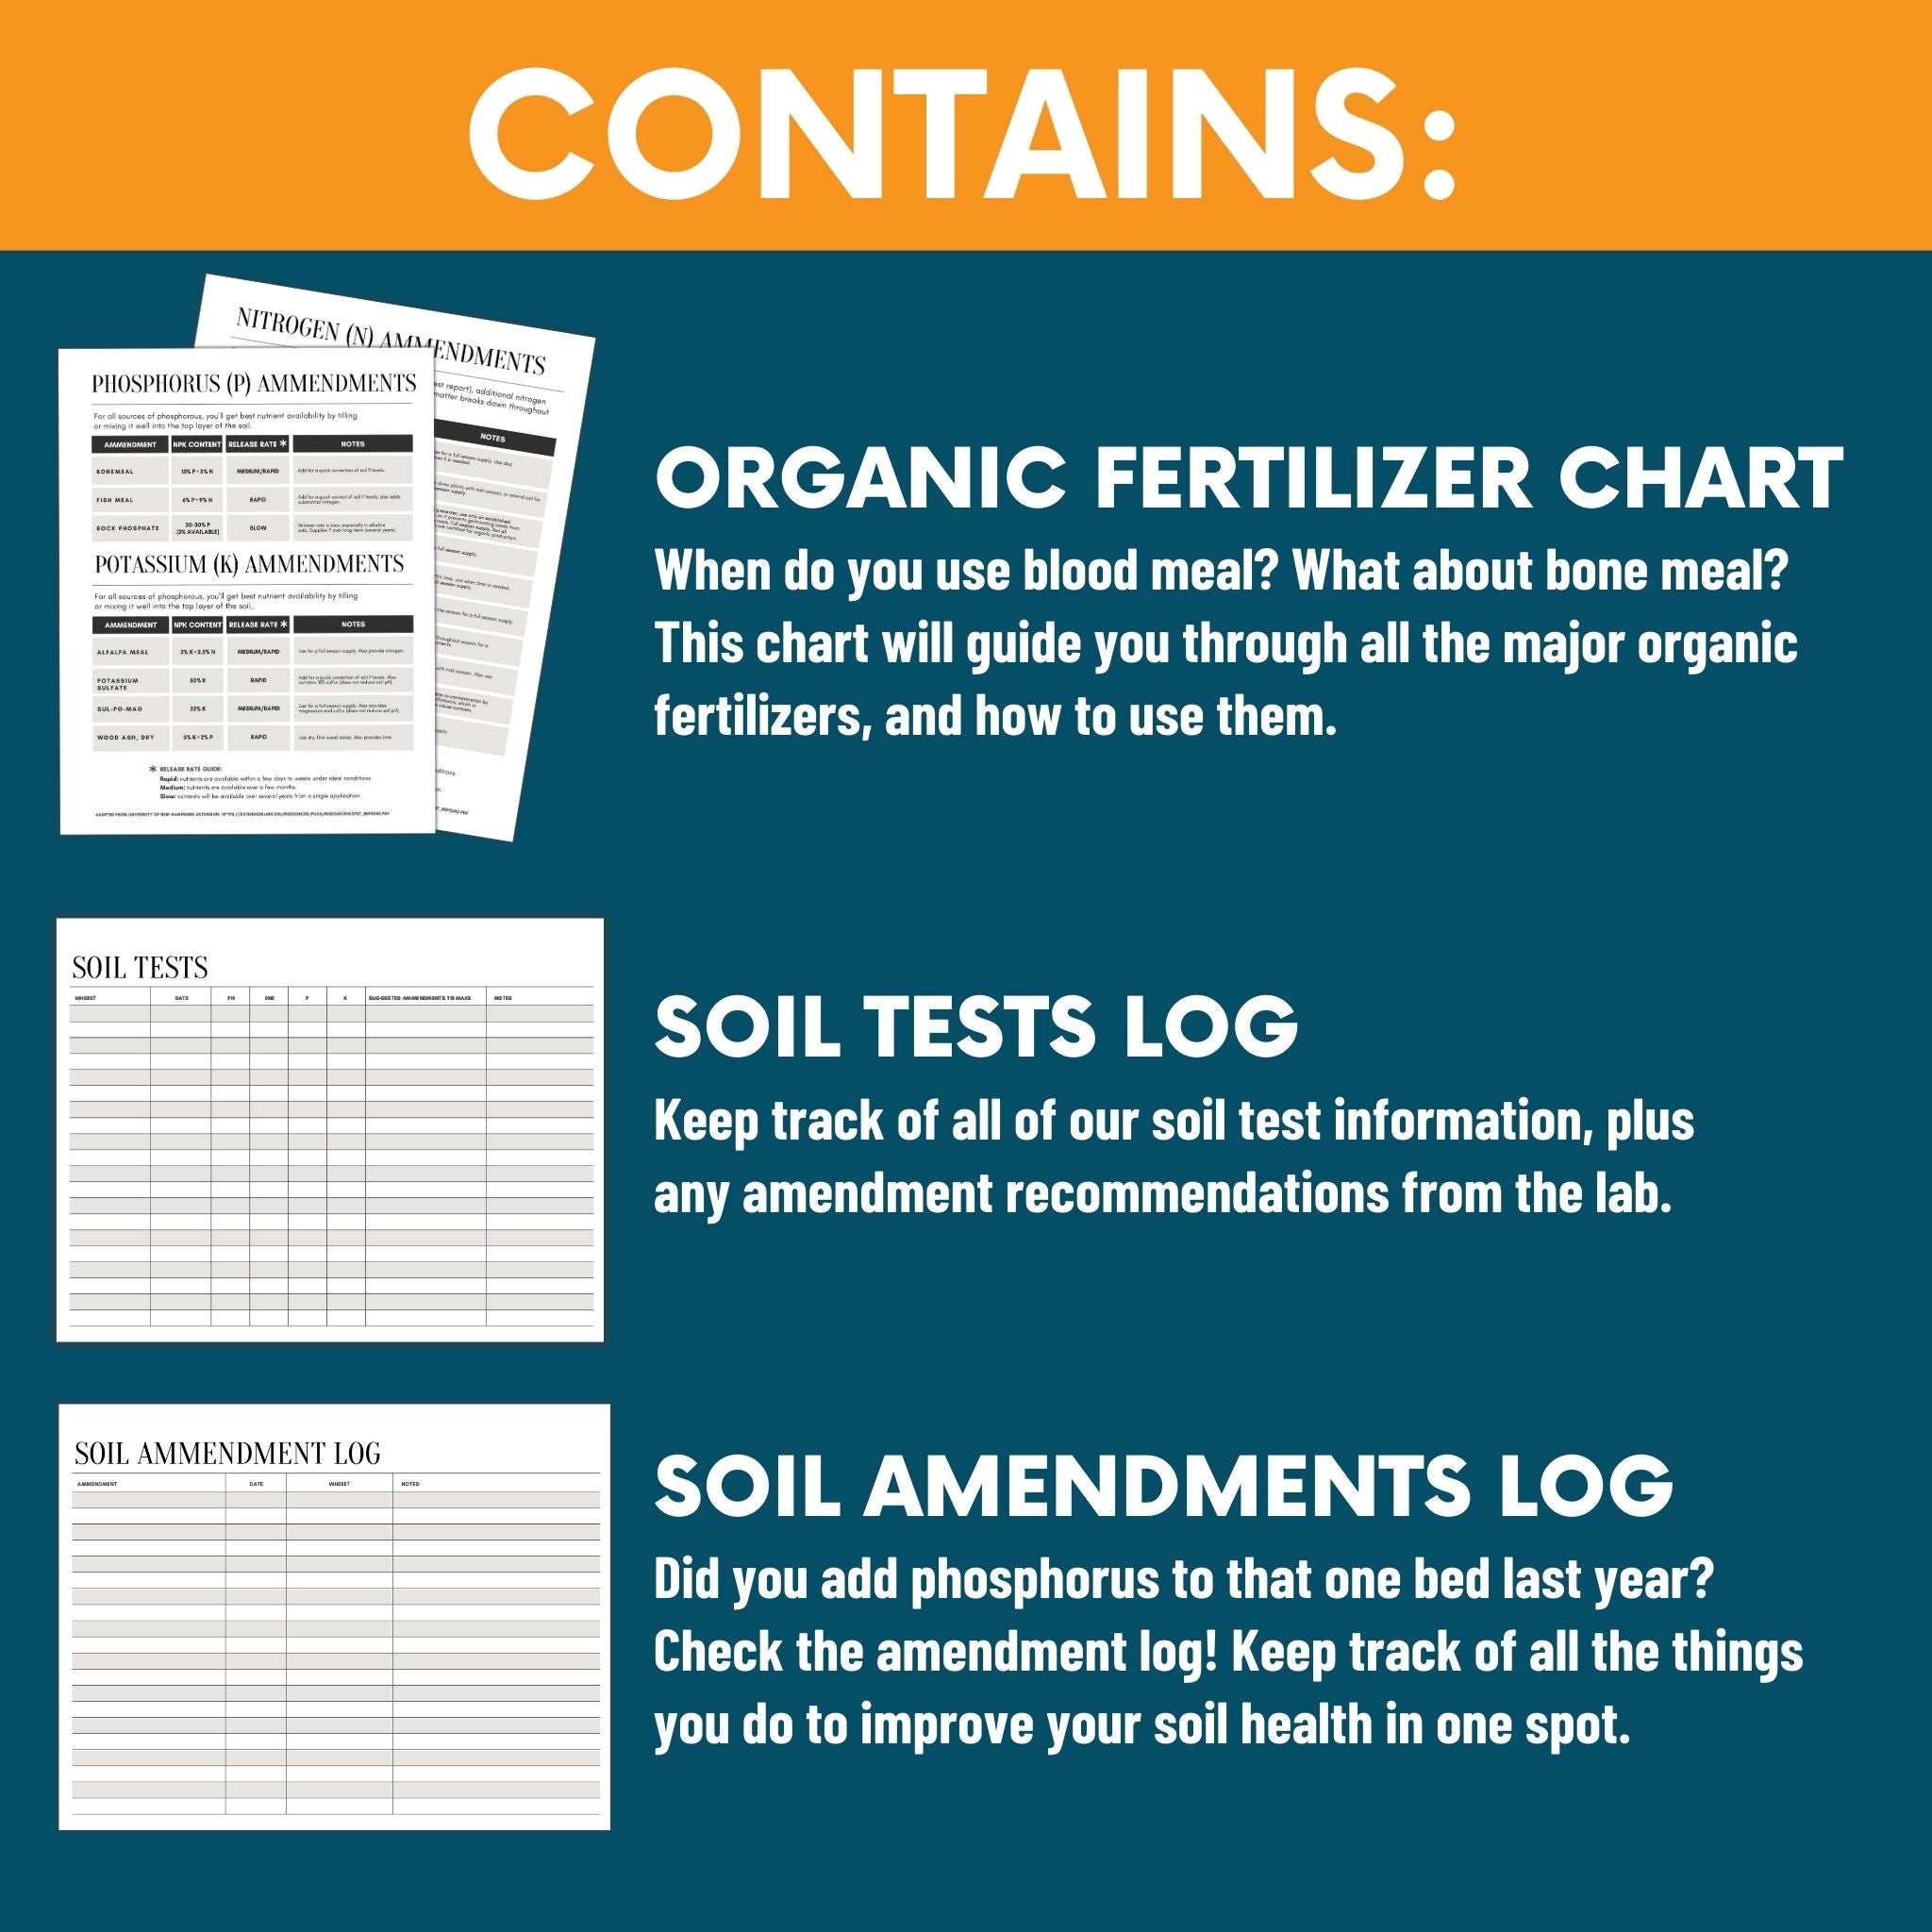 Contains: Organic Fertilizer Chart (When do you use blood meal? What about bone meal? This chart will guide you through all the major organic fertilizers and how to use them). Soil Tests Log (Keep track of all of our soil test information, plus any amendment recommendations from the lab). Soil Amendments Log (Did you add phosphorus to that one bed last year? Check the amendment log! Keep track of all the things you do to improve your soil health in one spot.)